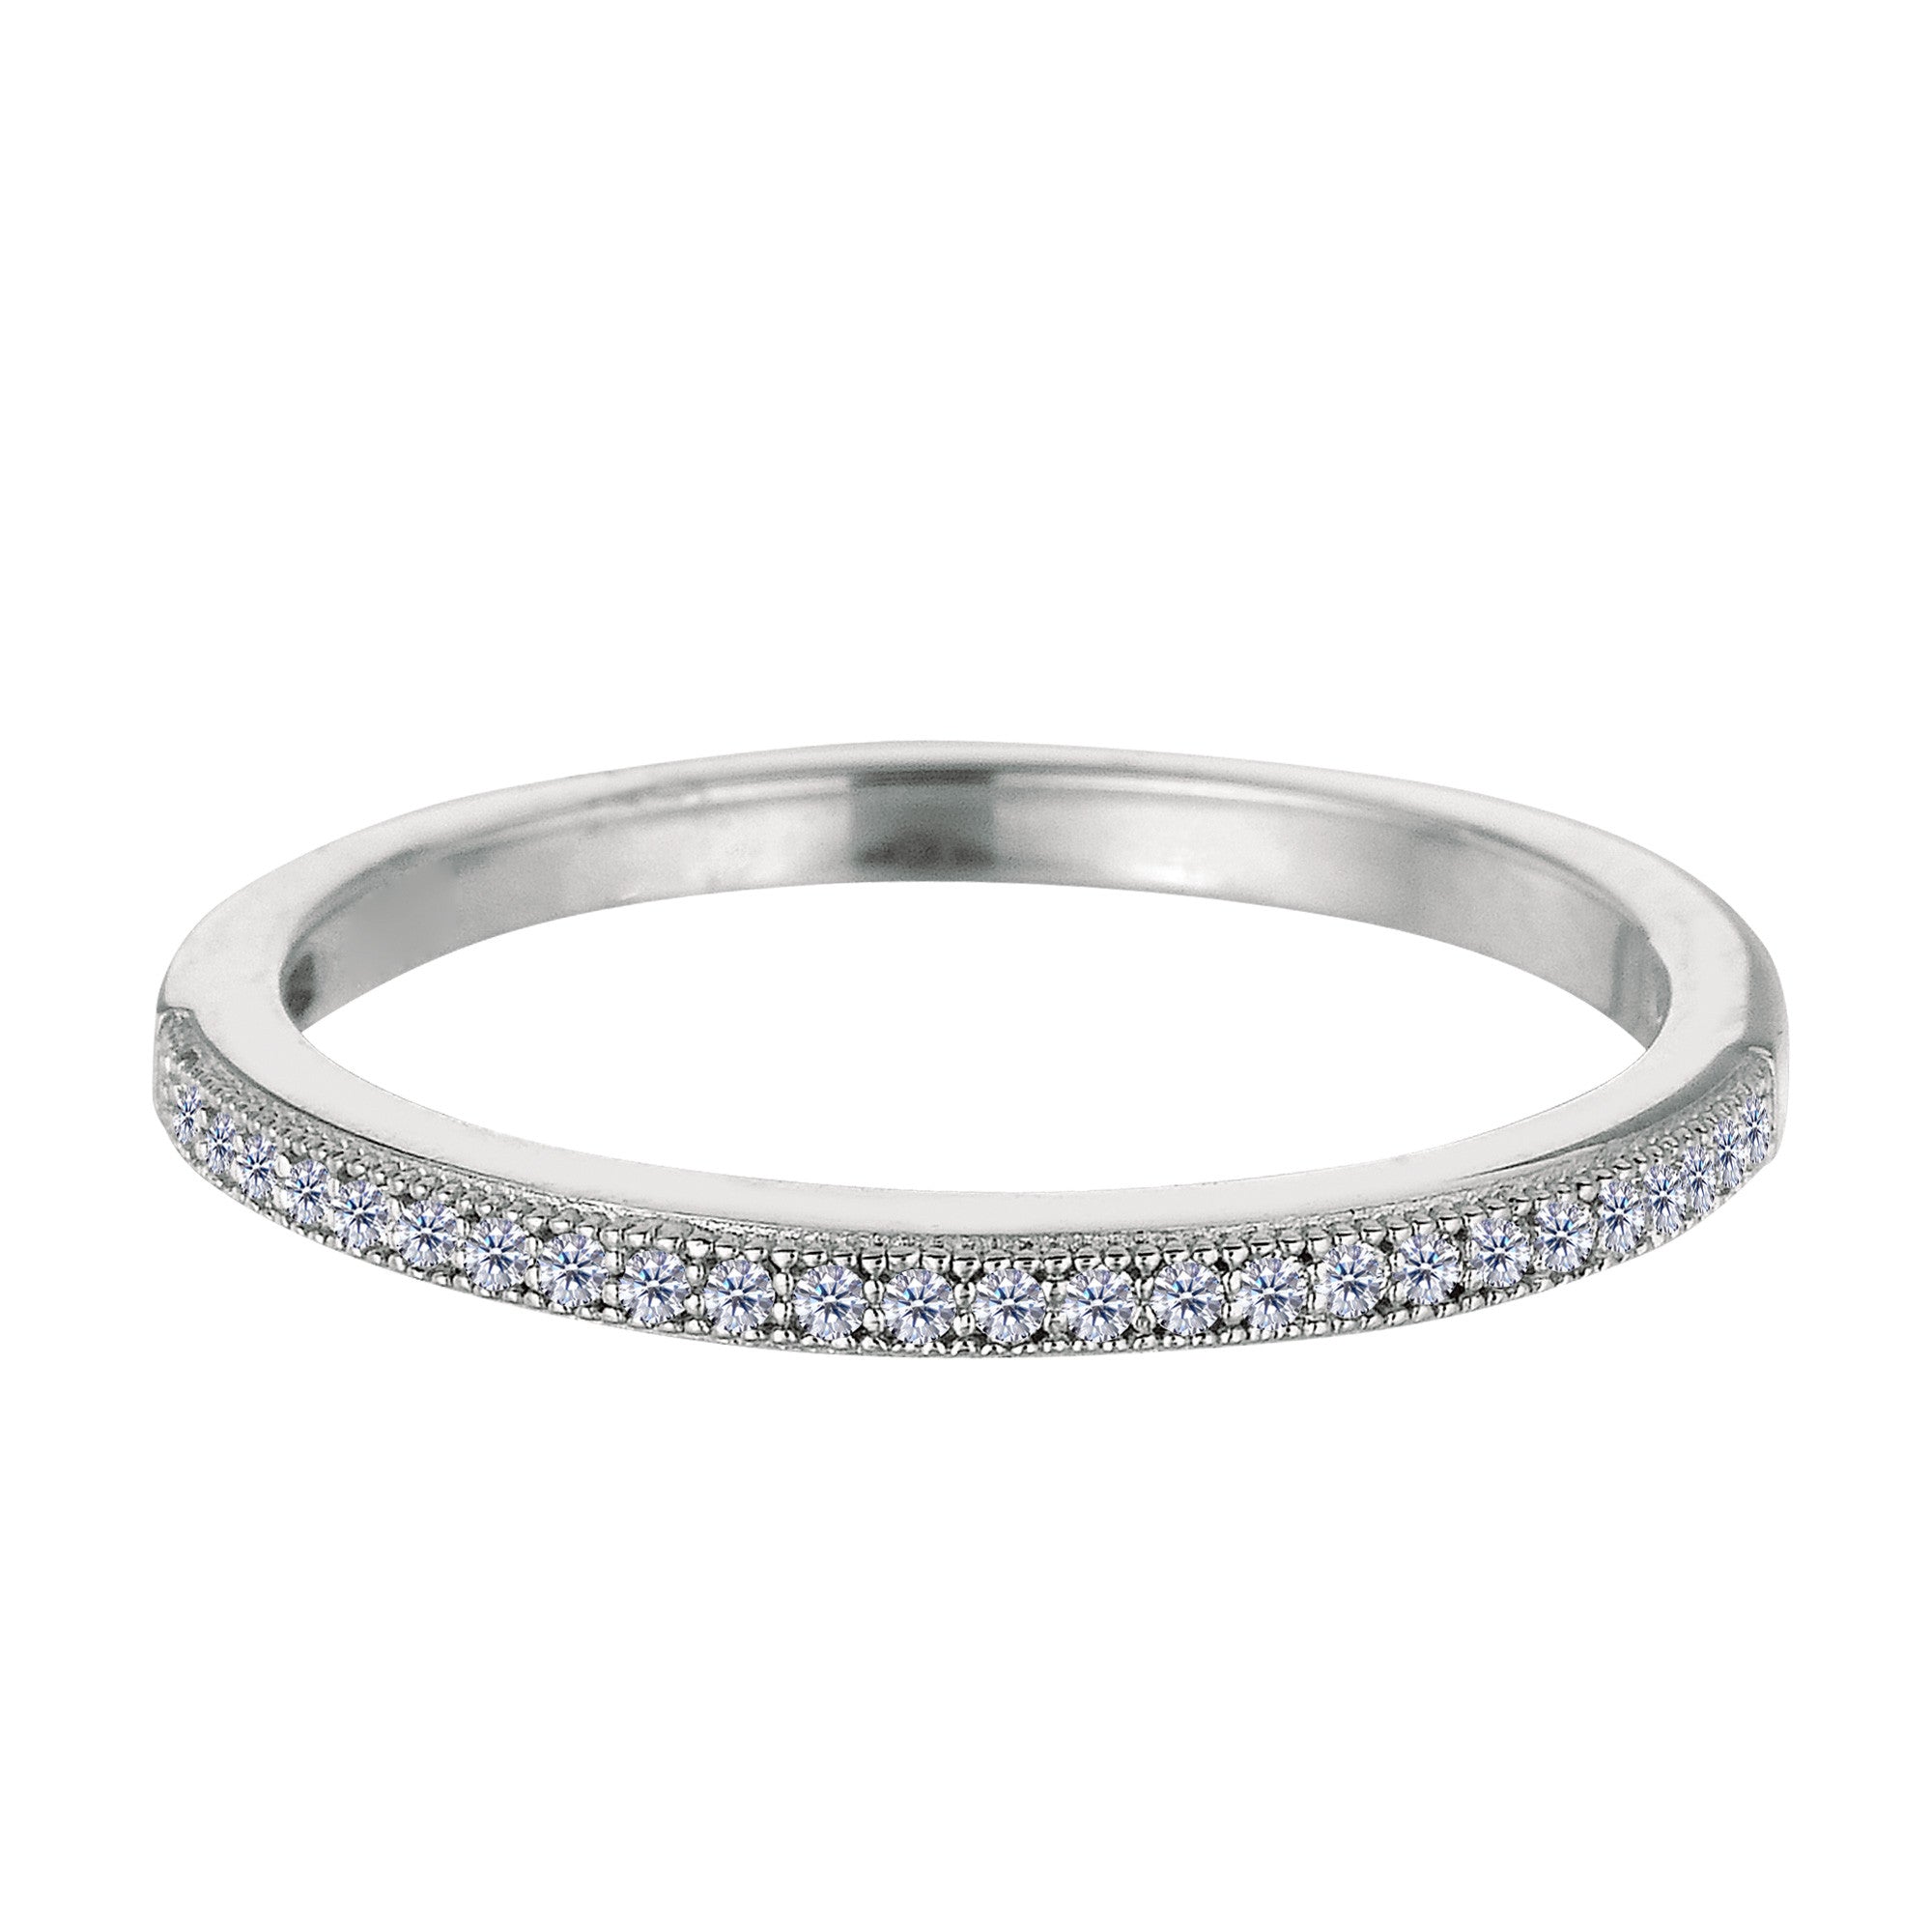 Sterling Silver Rhodium Finish Milgrain Stackable Ring With Pave' Set Cz Stones fine designer jewelry for men and women